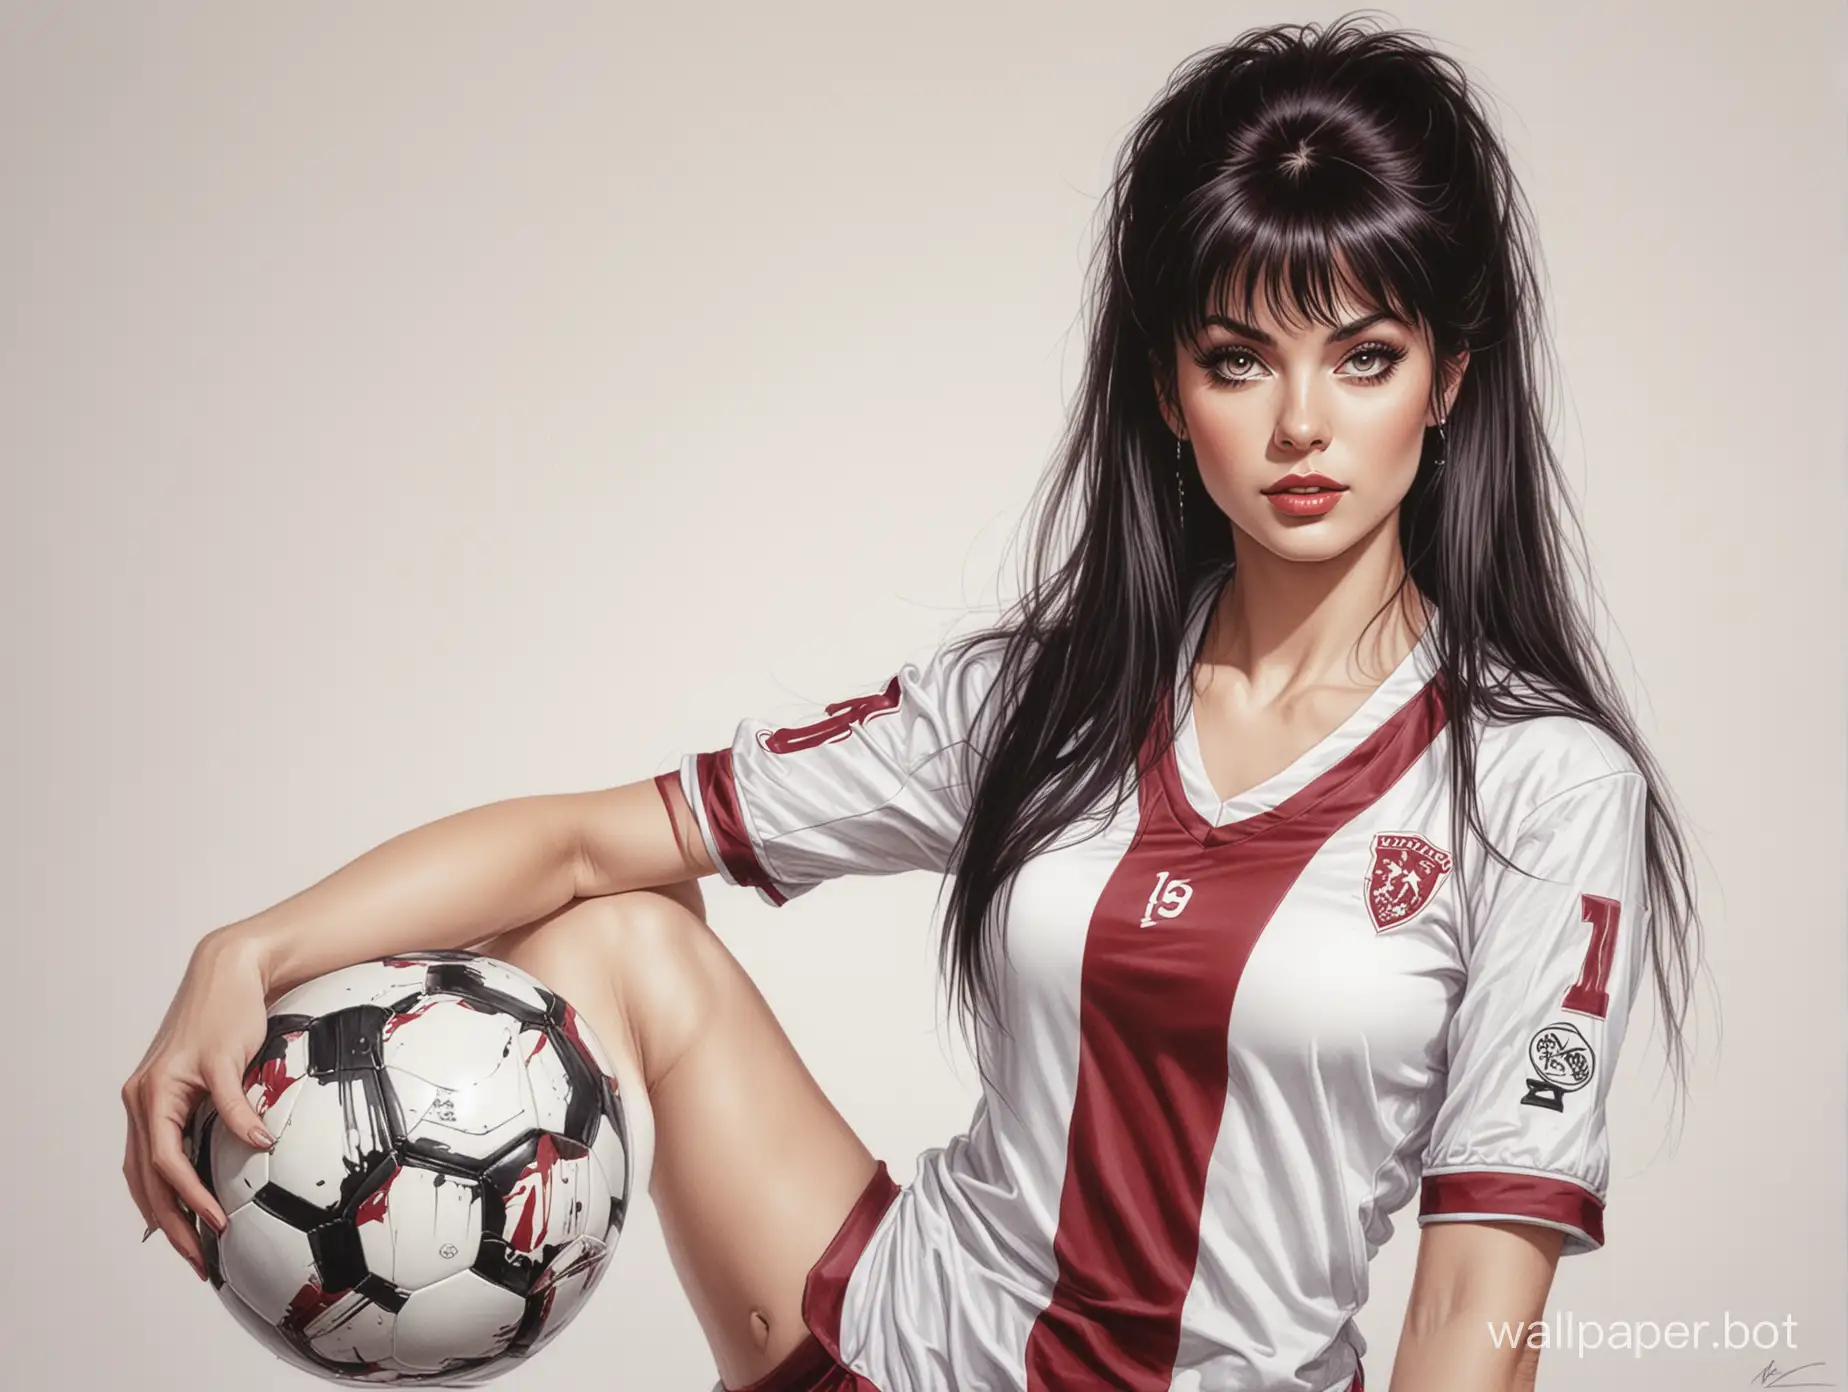 Sketch Elvira 19 years old dark hair 4th size breasts narrow waist in white-burgundy soccer uniform on a white background high-realistic marker drawing in the style of Luis Royo portrait 16K